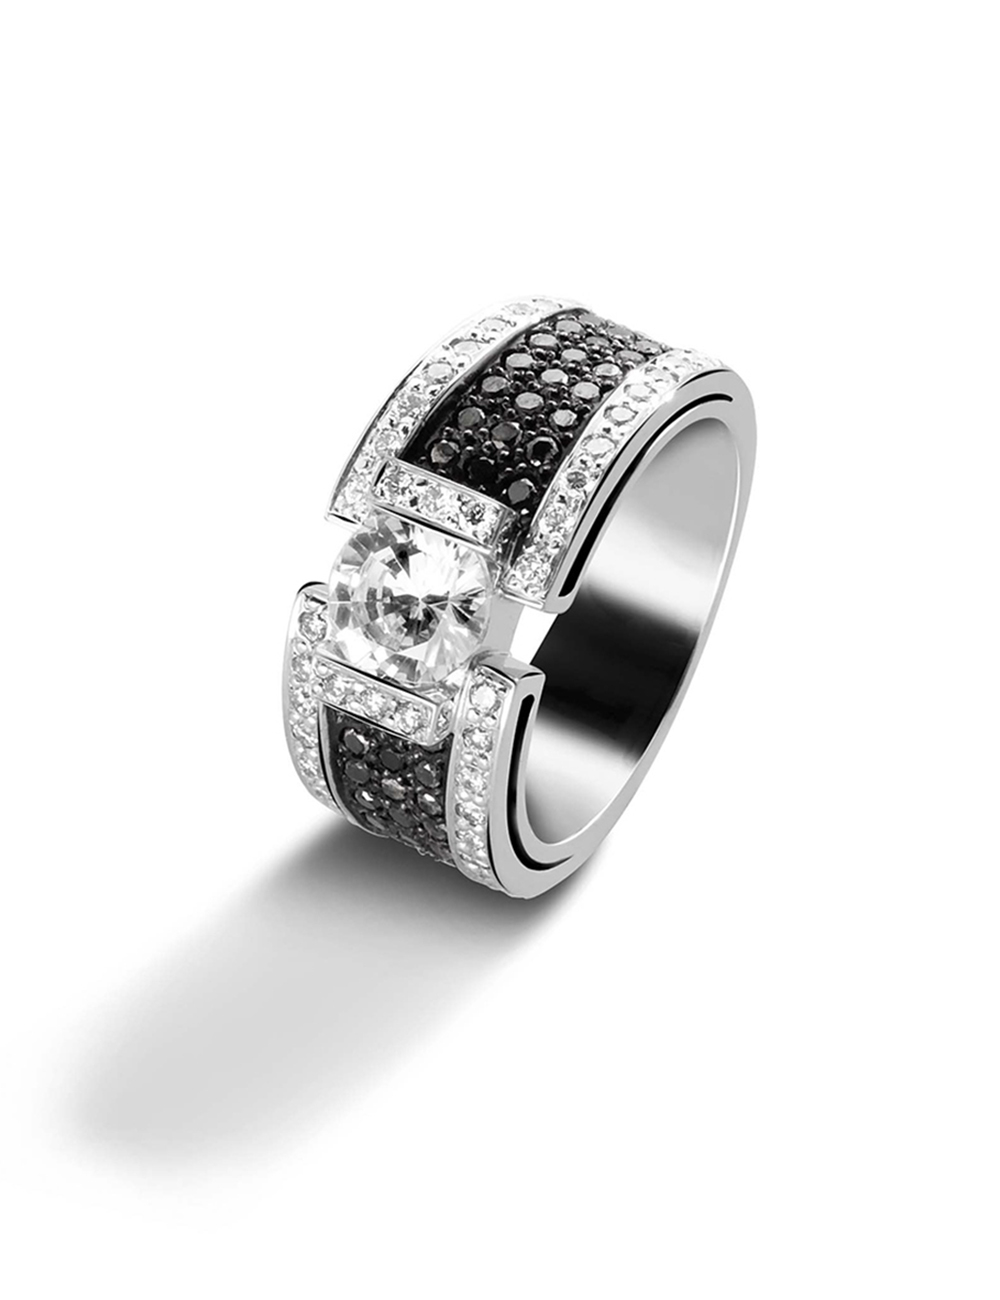 Modern luxury women's ring with a 1-carat center brilliant-cut white diamond and pavé of white and black diamonds.